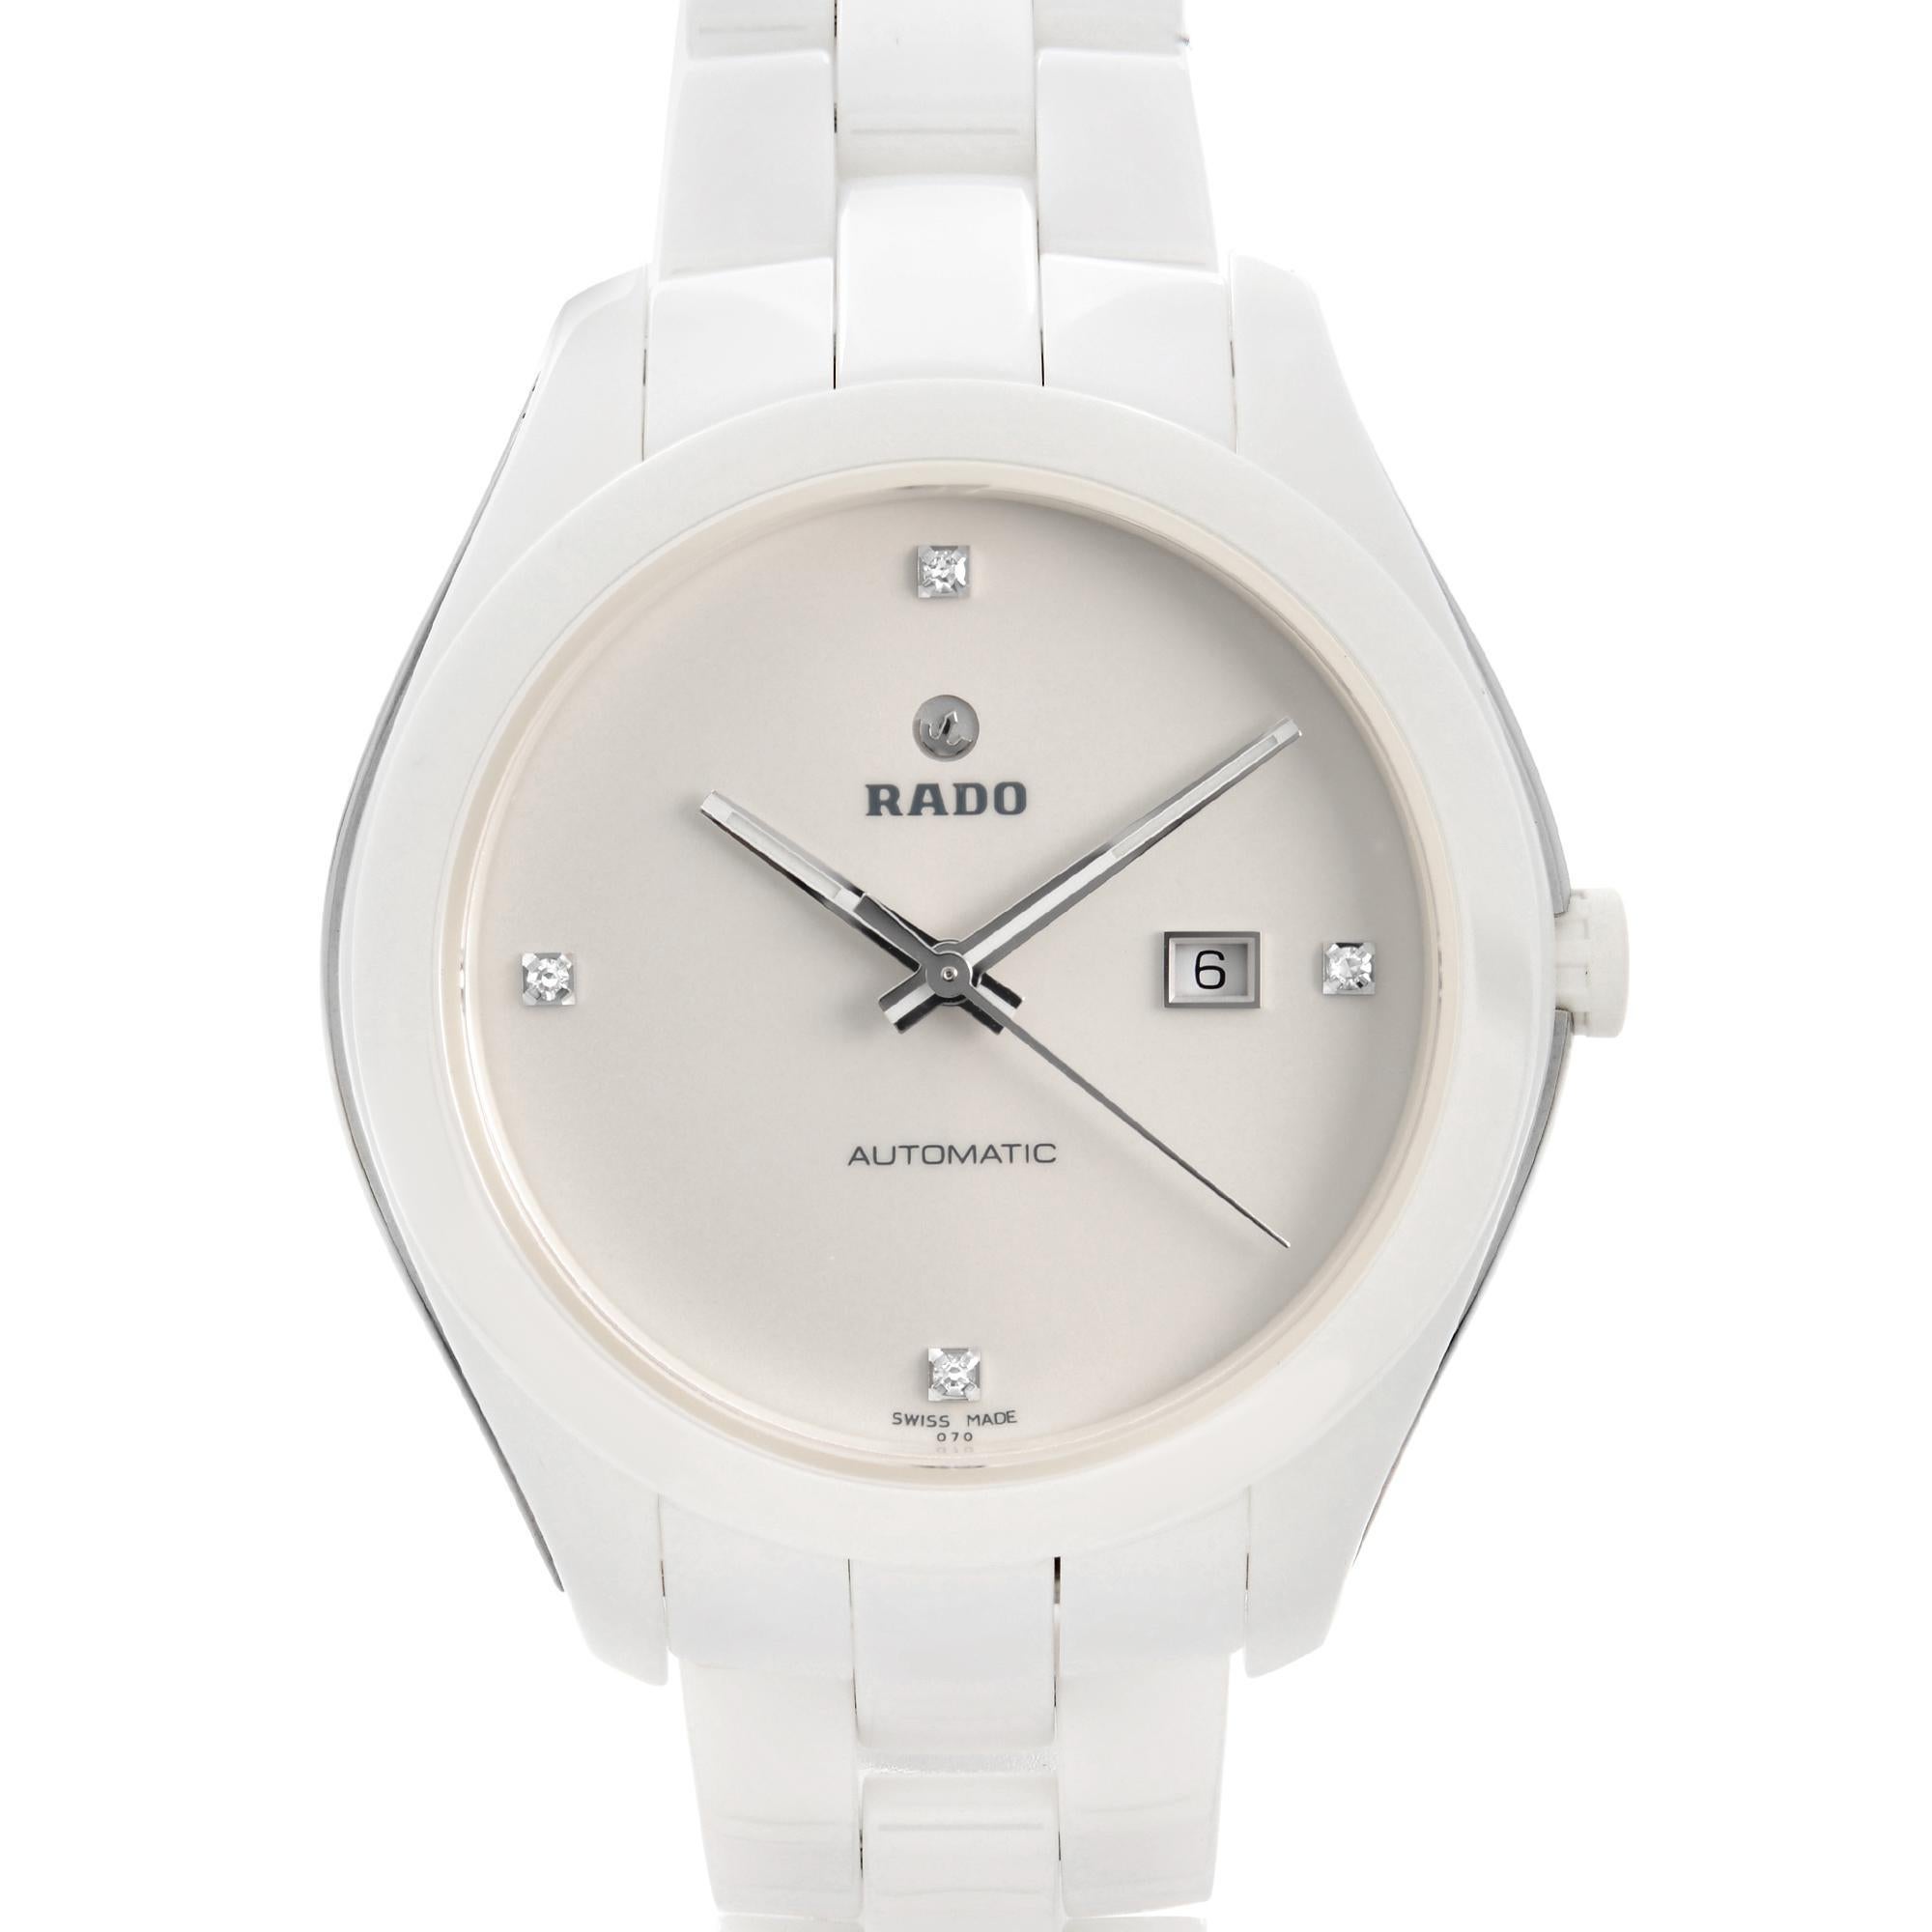 Display Model Rado Hyperchrome Ceramic White Diamond Dial Automatic Ladies Watch R32258702 This Ladies Timepiece is Powered by an Automatic Movement and Features: High-Tech White Ceramic Case and Bracelet, Fixed White Ceramic Bezel, White Dial with